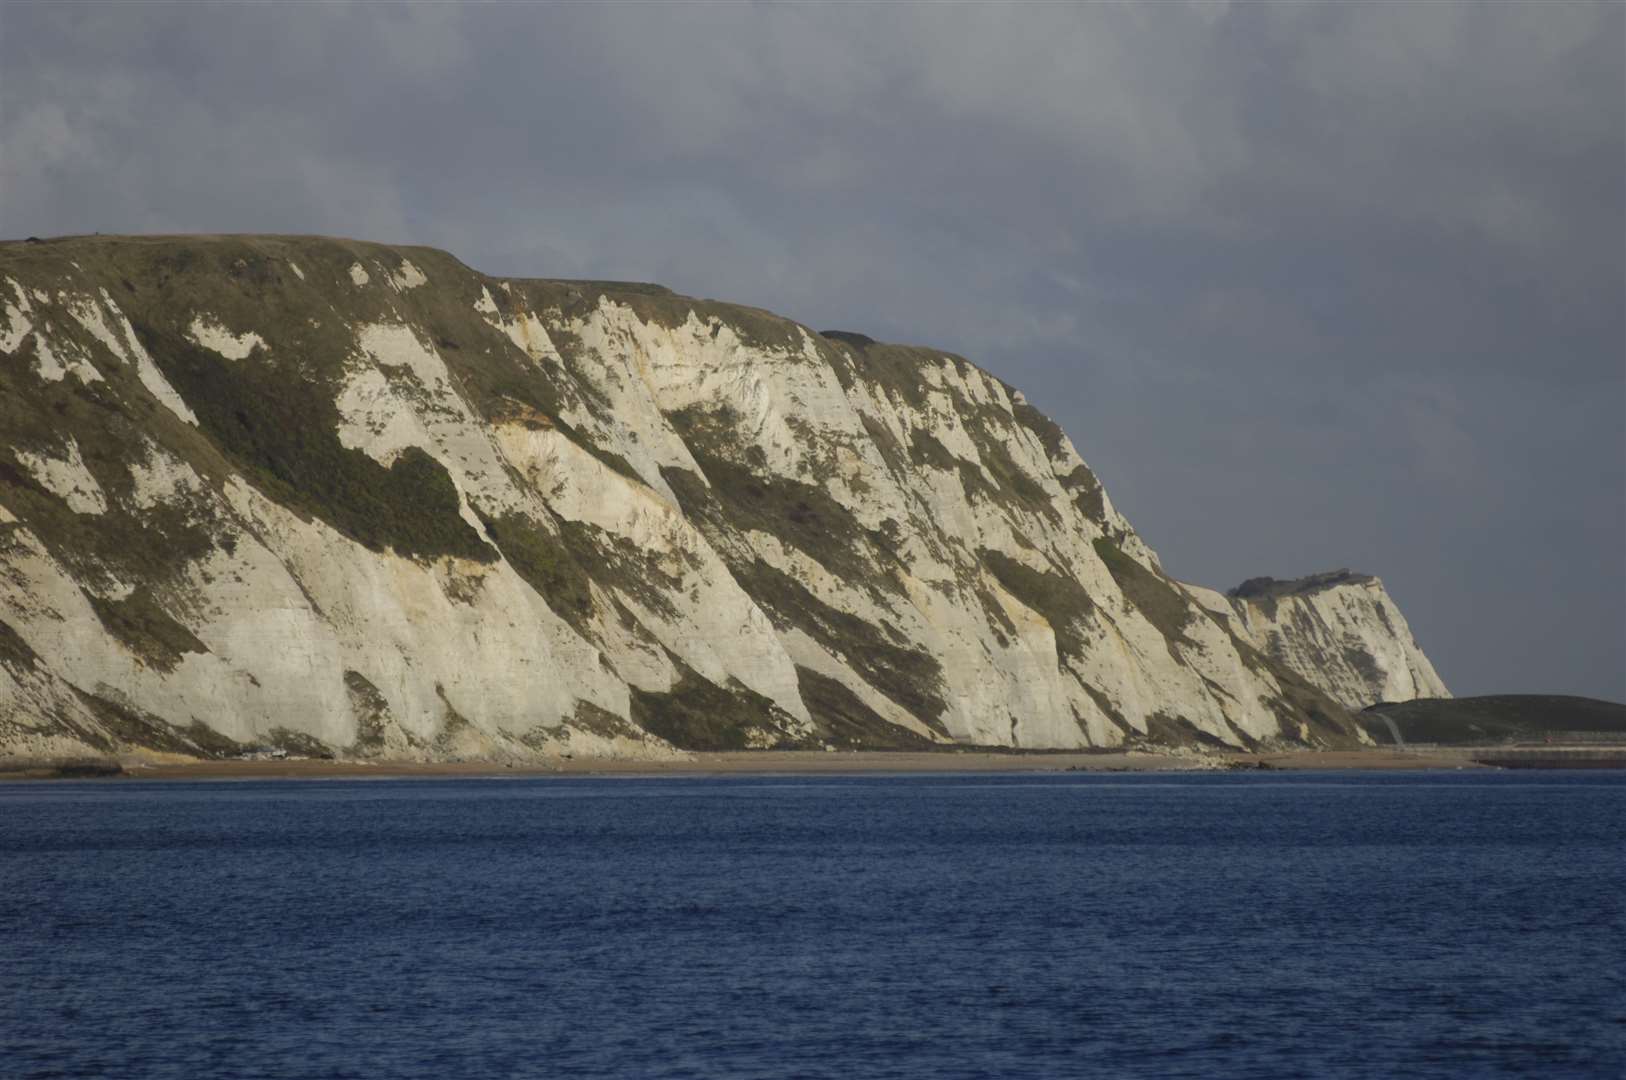 There's plenty lurking in those famous white chalk cliffs of ours